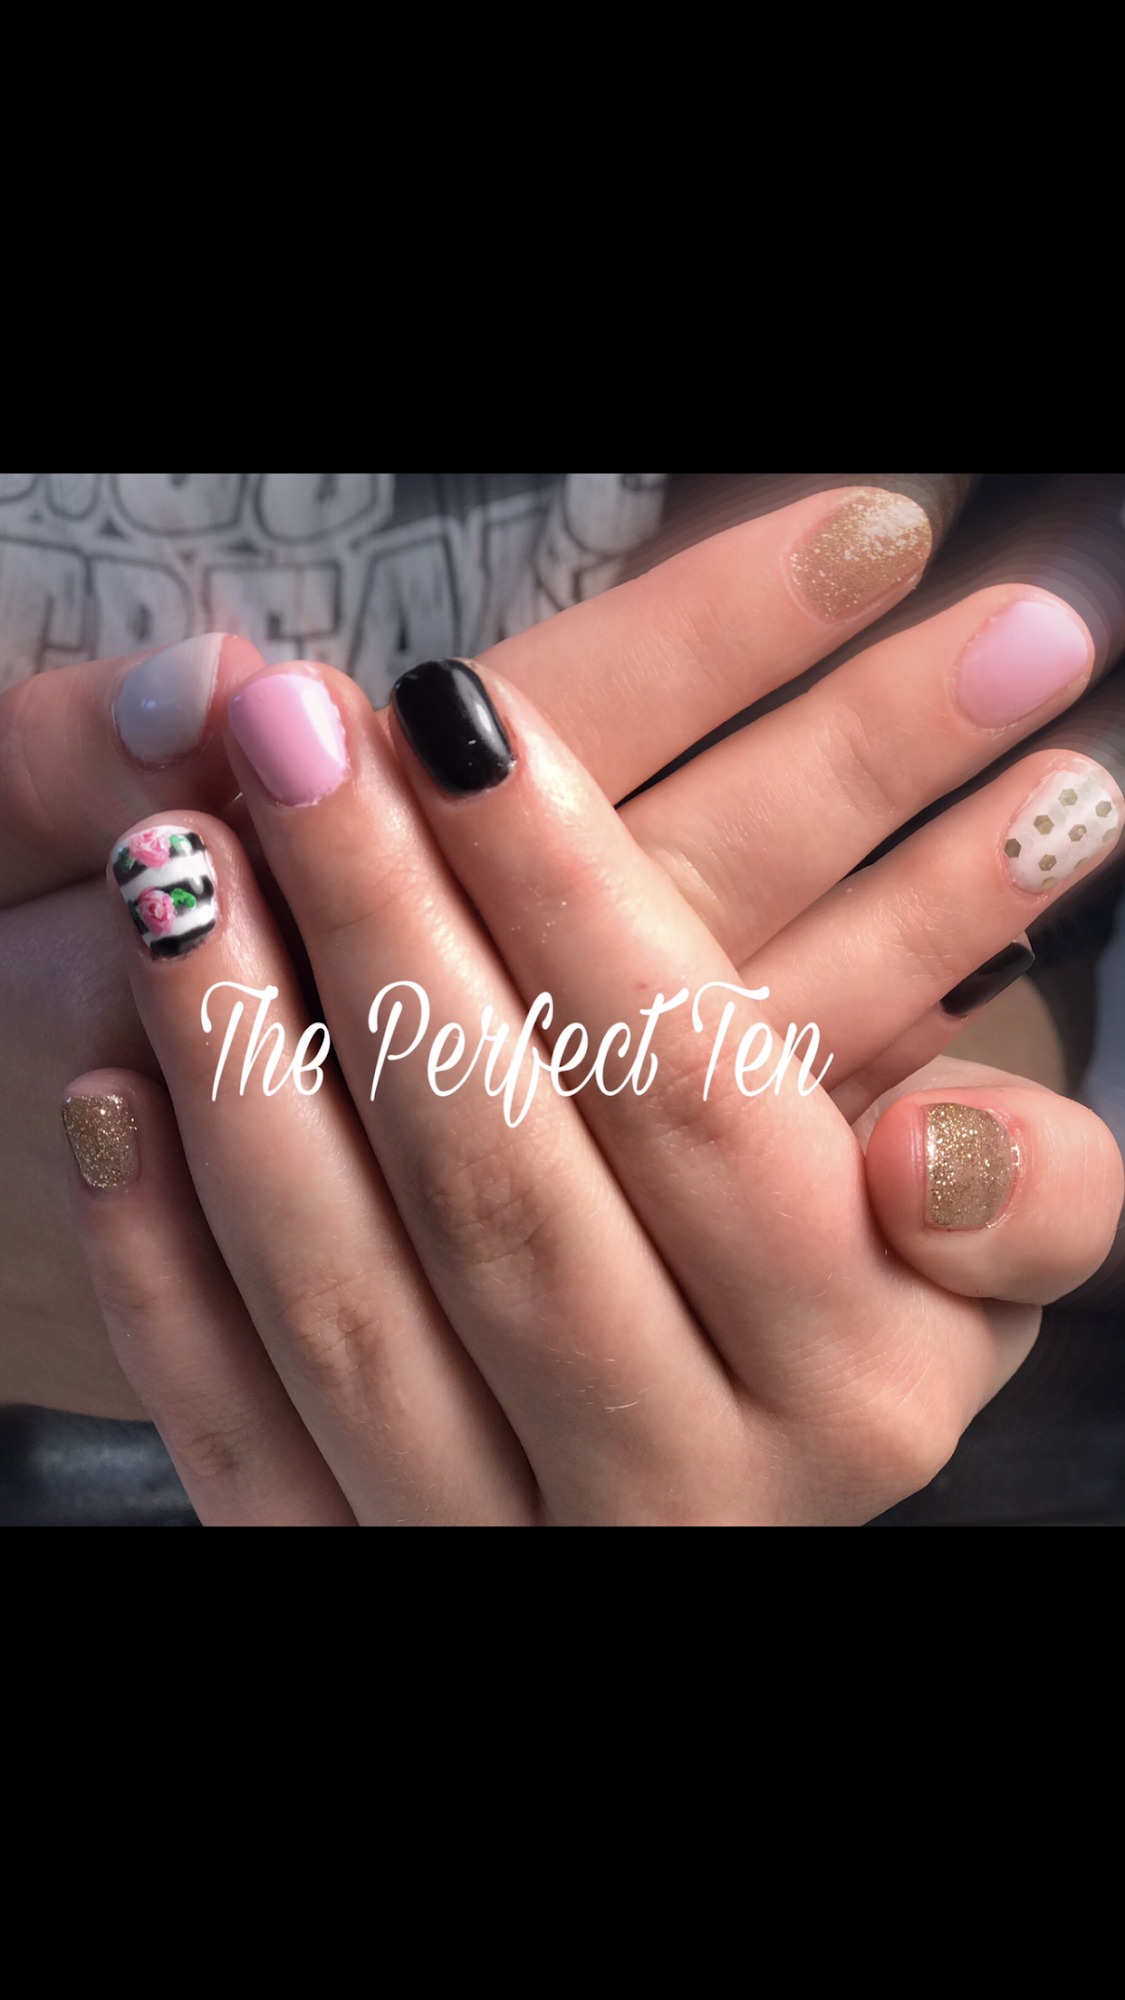 The Perfect Ten Nail and Beauty Salon